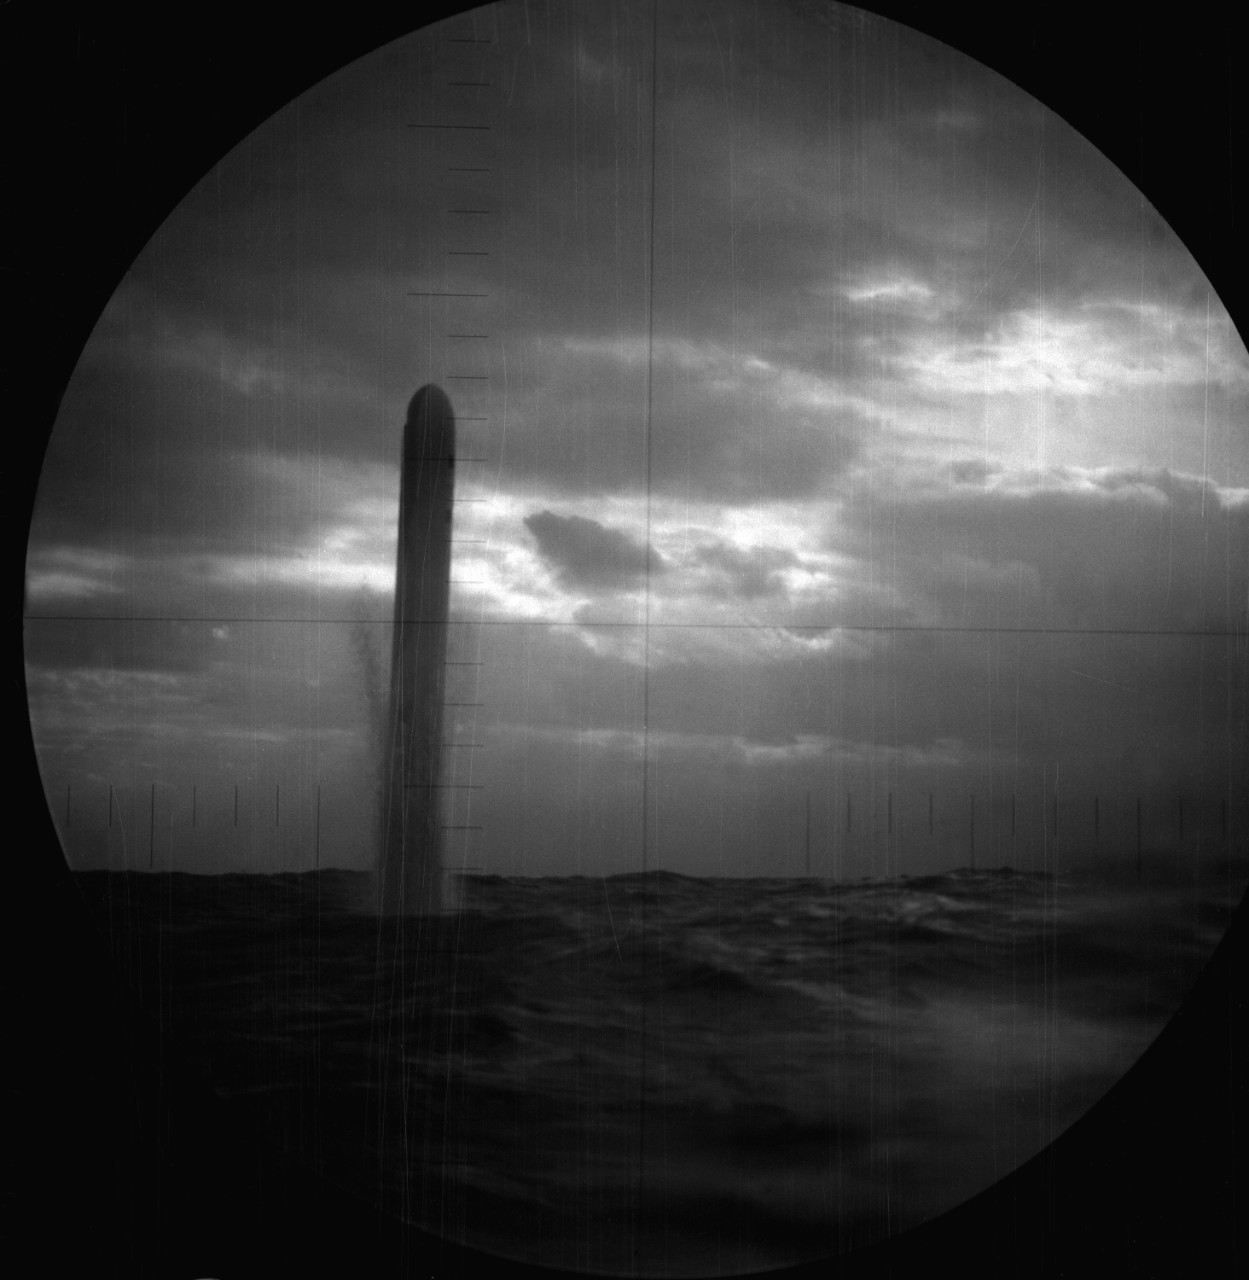 330-CFD-DN-SN-91-08884:  BGM-109 Tomahawk land attack missile (TLAM), Operation Desert Storm, 1991.   As seen through USS Pittsburgh’s (SSN-720) periscope and targeted on an Iraqi position.   It begins to leave the water following a vertical launch tube onboard the nuclear-powered attack submarine.  Official U.S. Navy Photograph, now in the collections of the National Archives.  